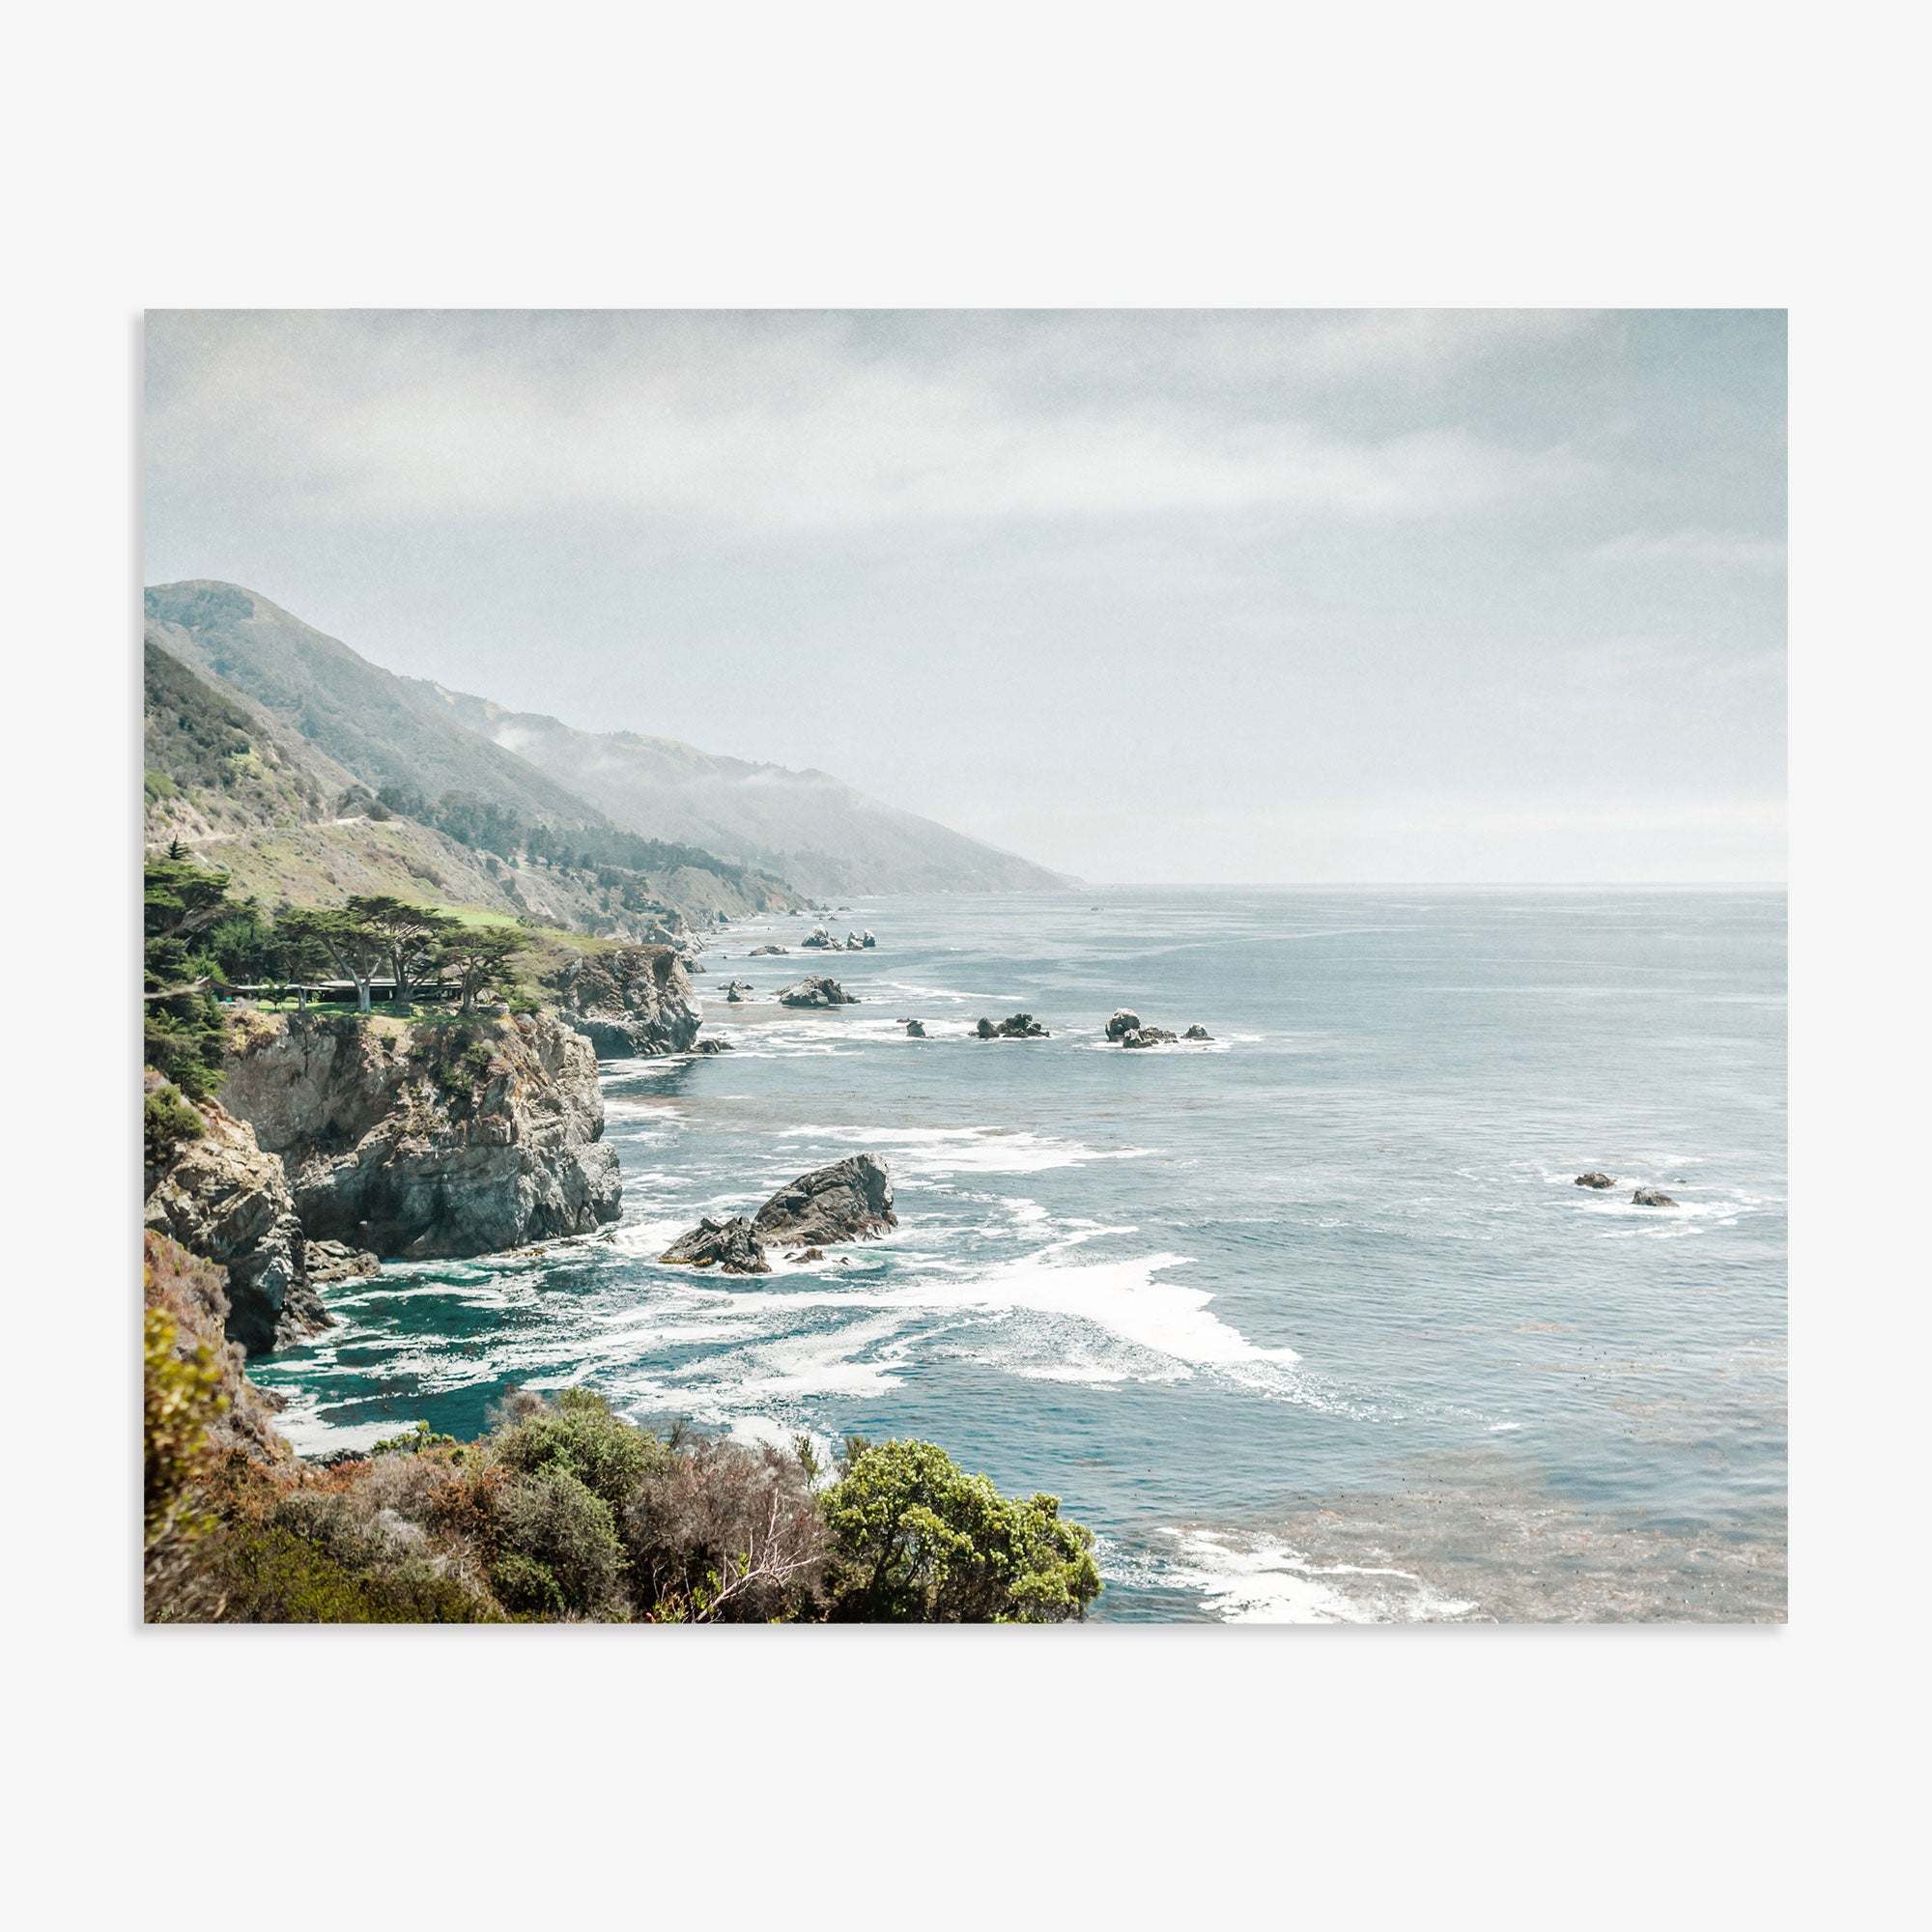 A scenic view of a misty coastline along California Highway 1 with rugged cliffs and waves crashing against the shore, under a soft cloudy sky. The landscape includes lush greenery and distant rocky outc featuring the Offley Green Big Sur Landscape Print 'Rocky Rocks'.